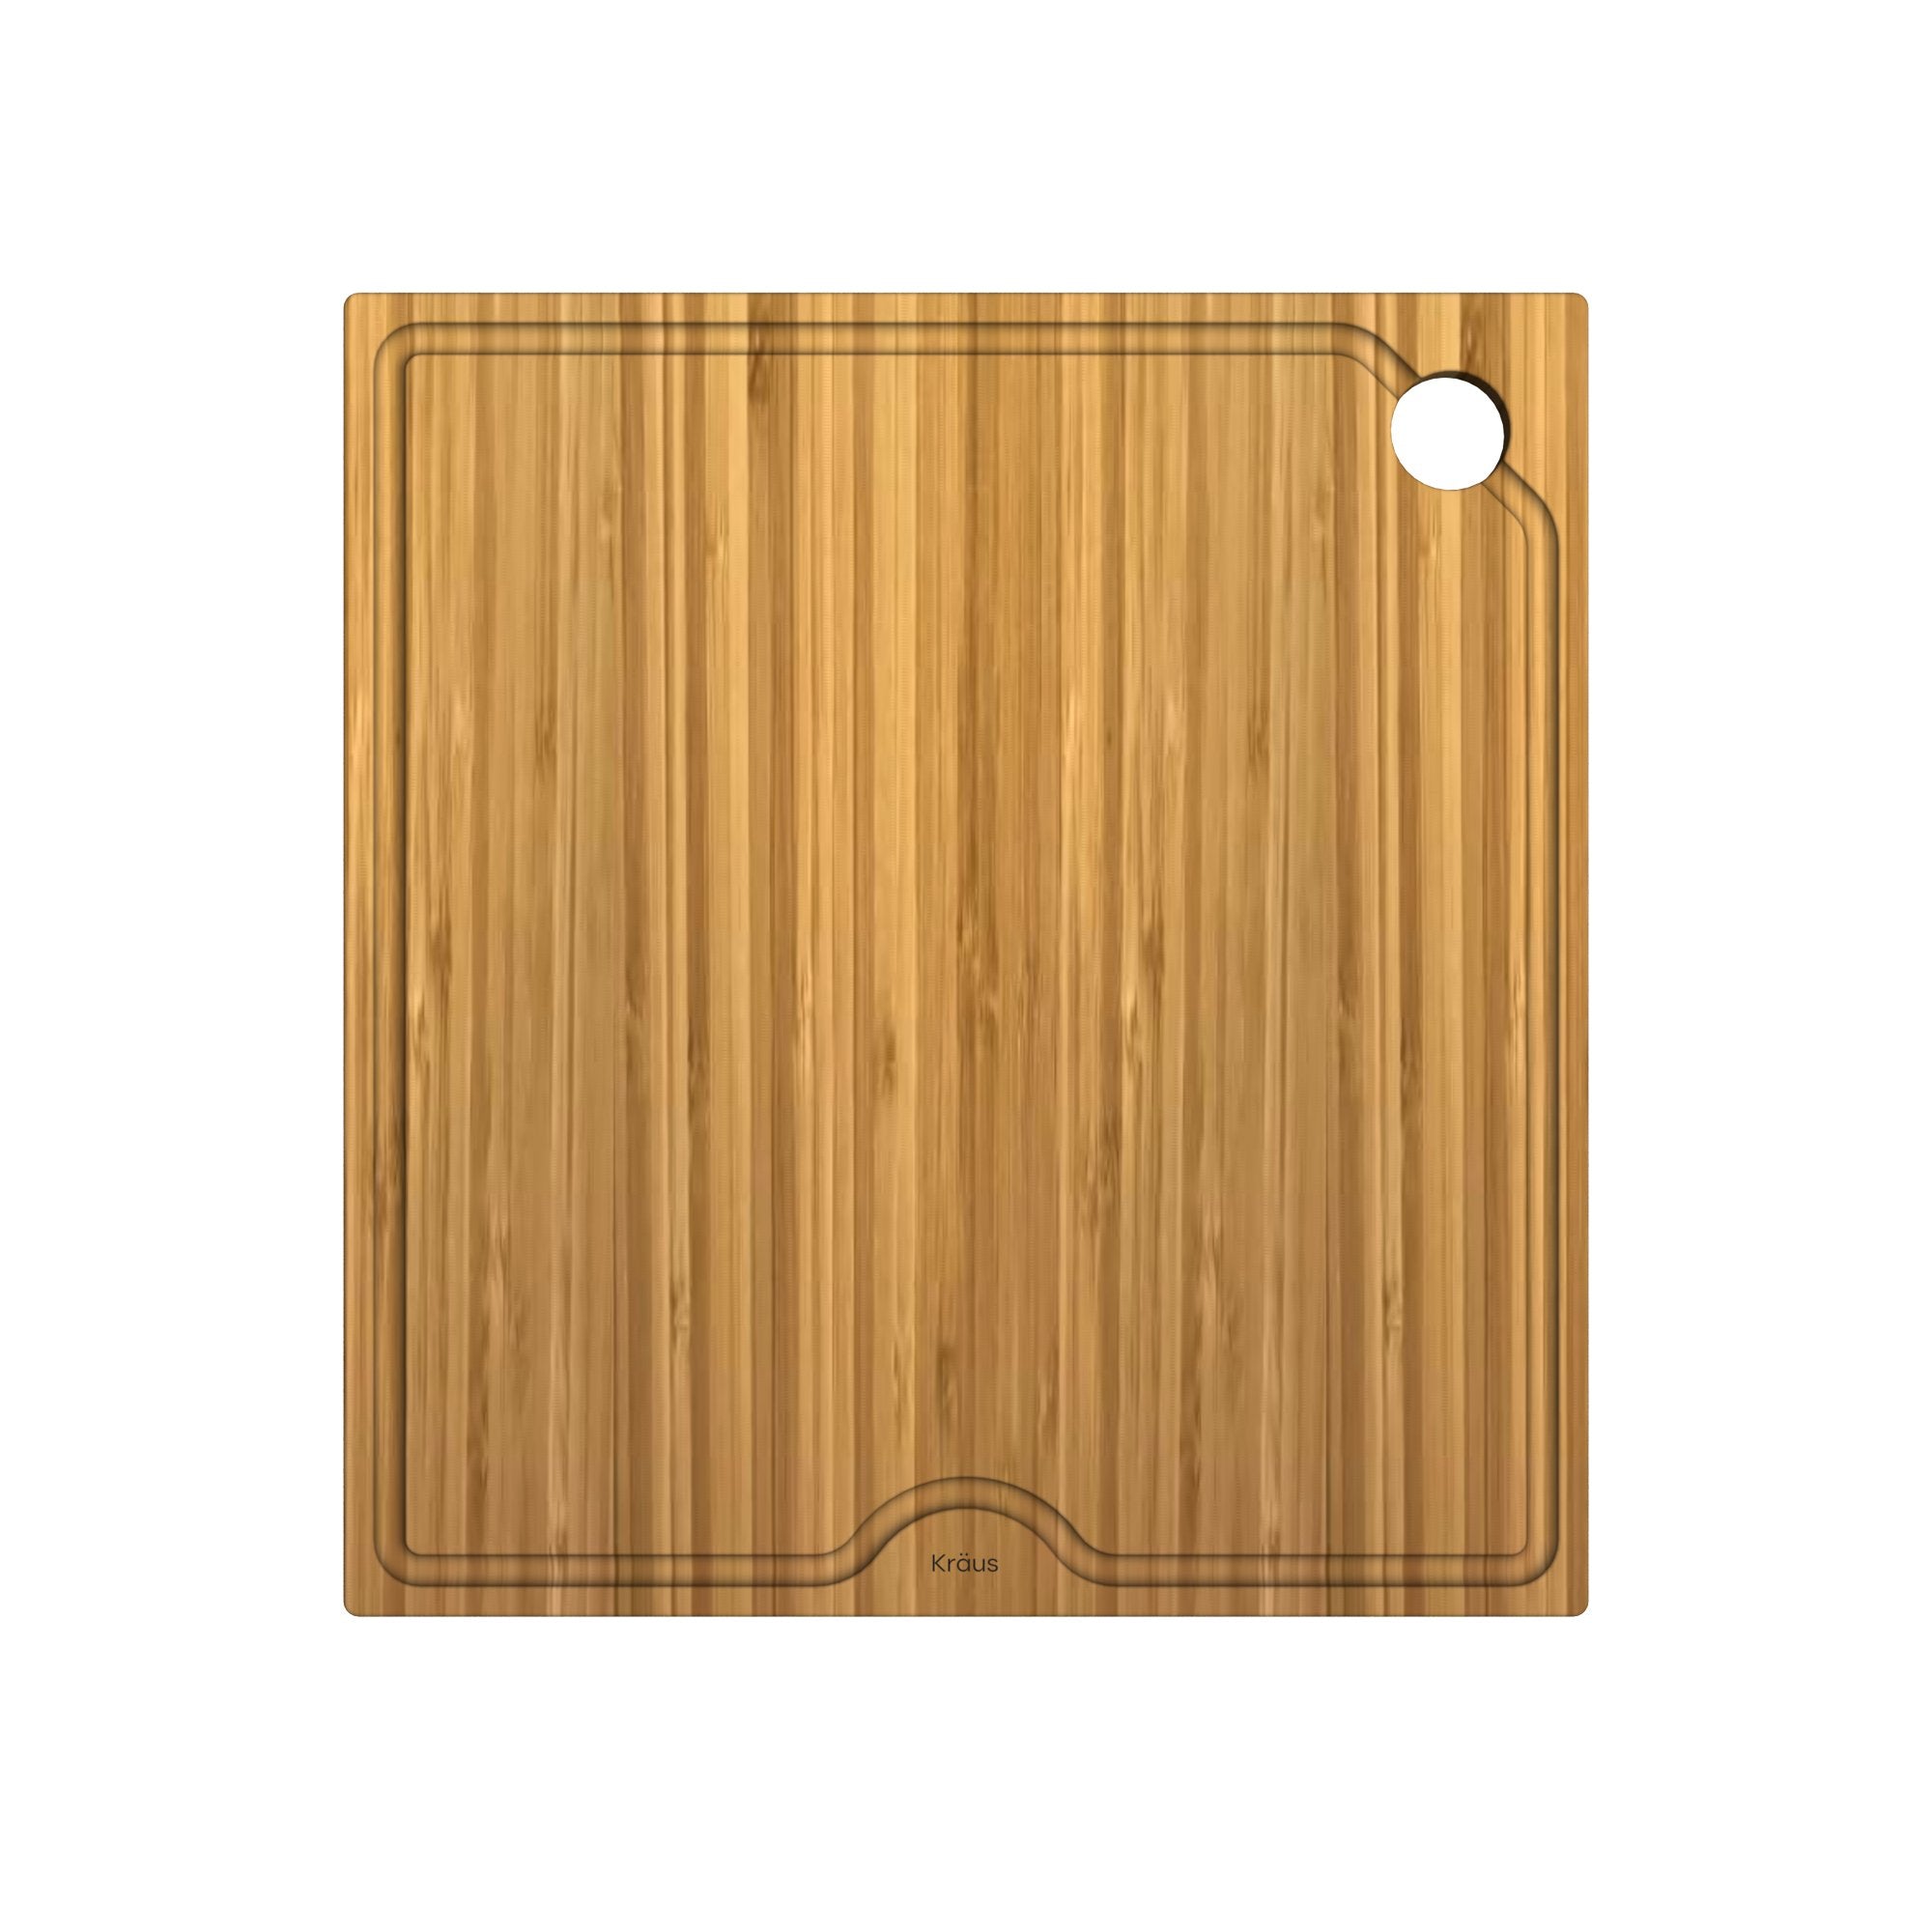 Handcrafted Recycled Paper Composite Cutting Board Set With a 